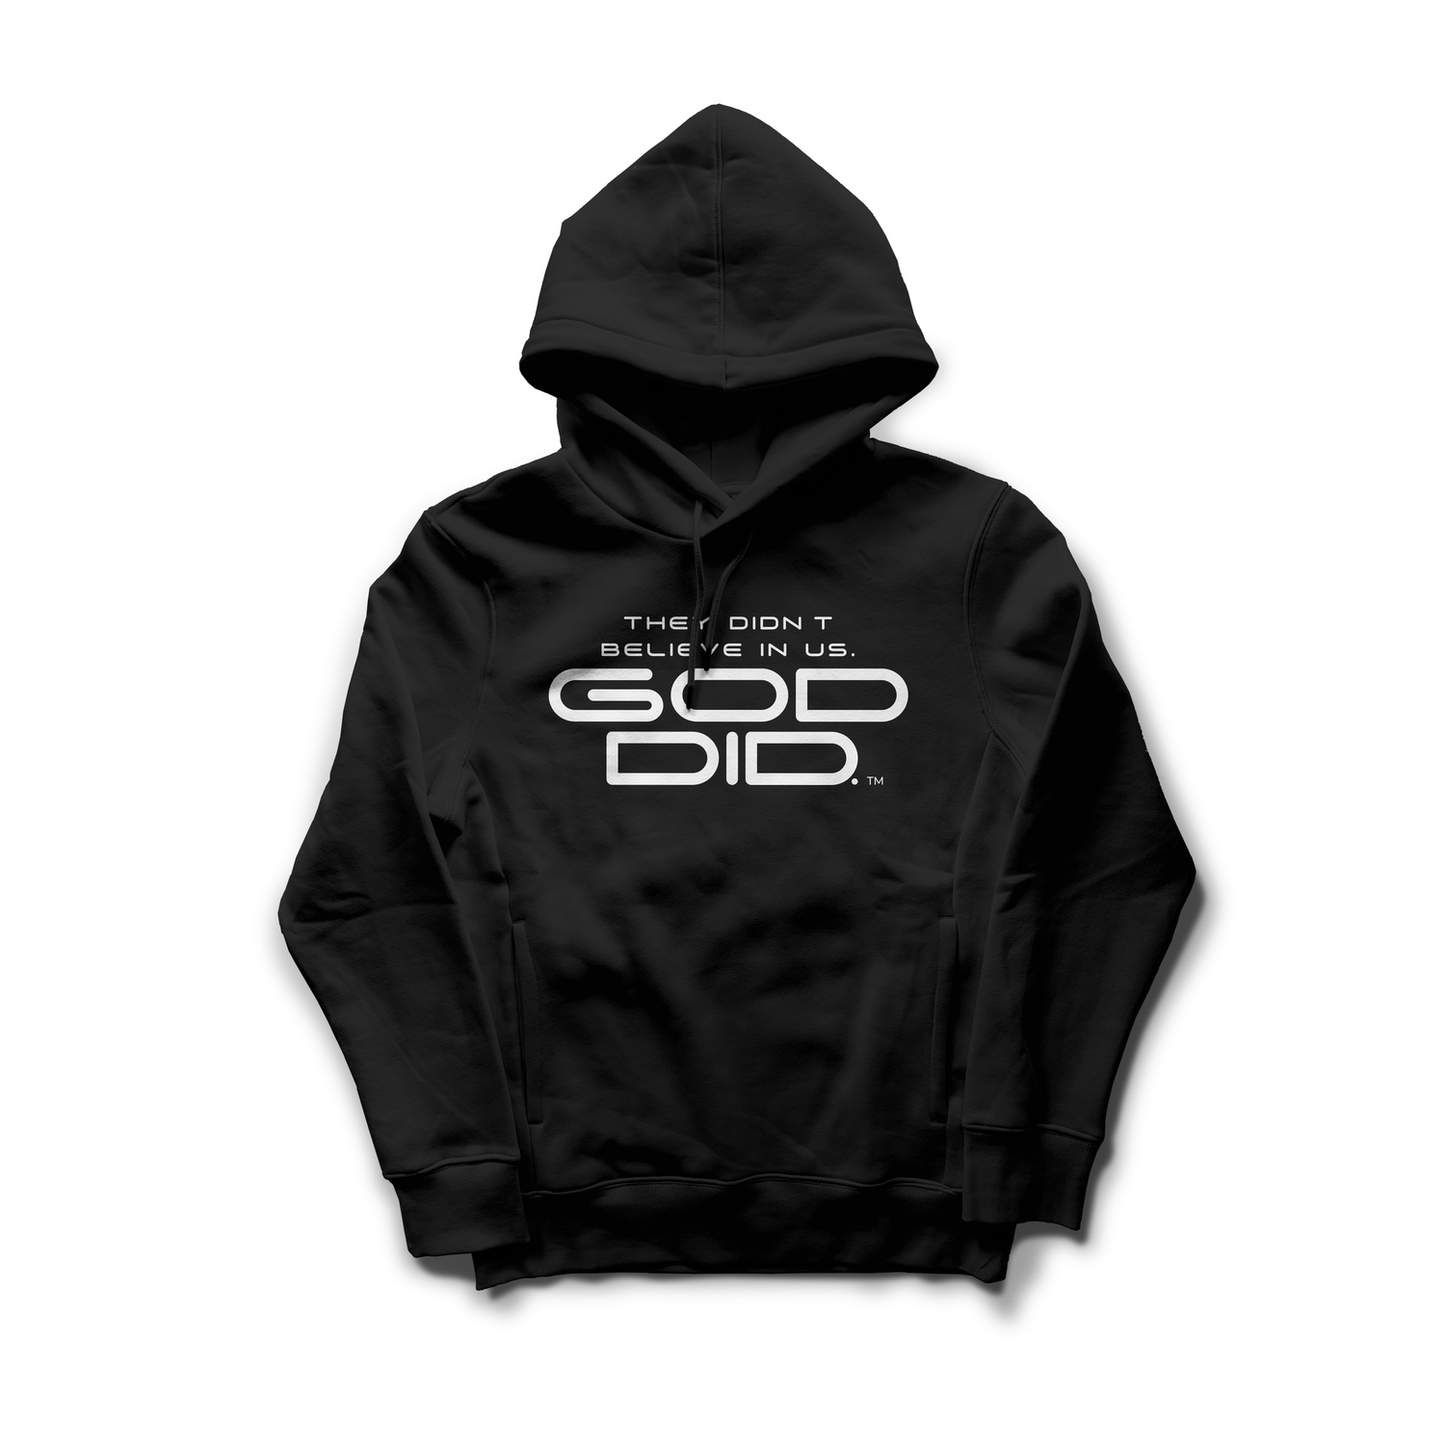 They Didn't Believe In Us. GOD DID. HOODIE